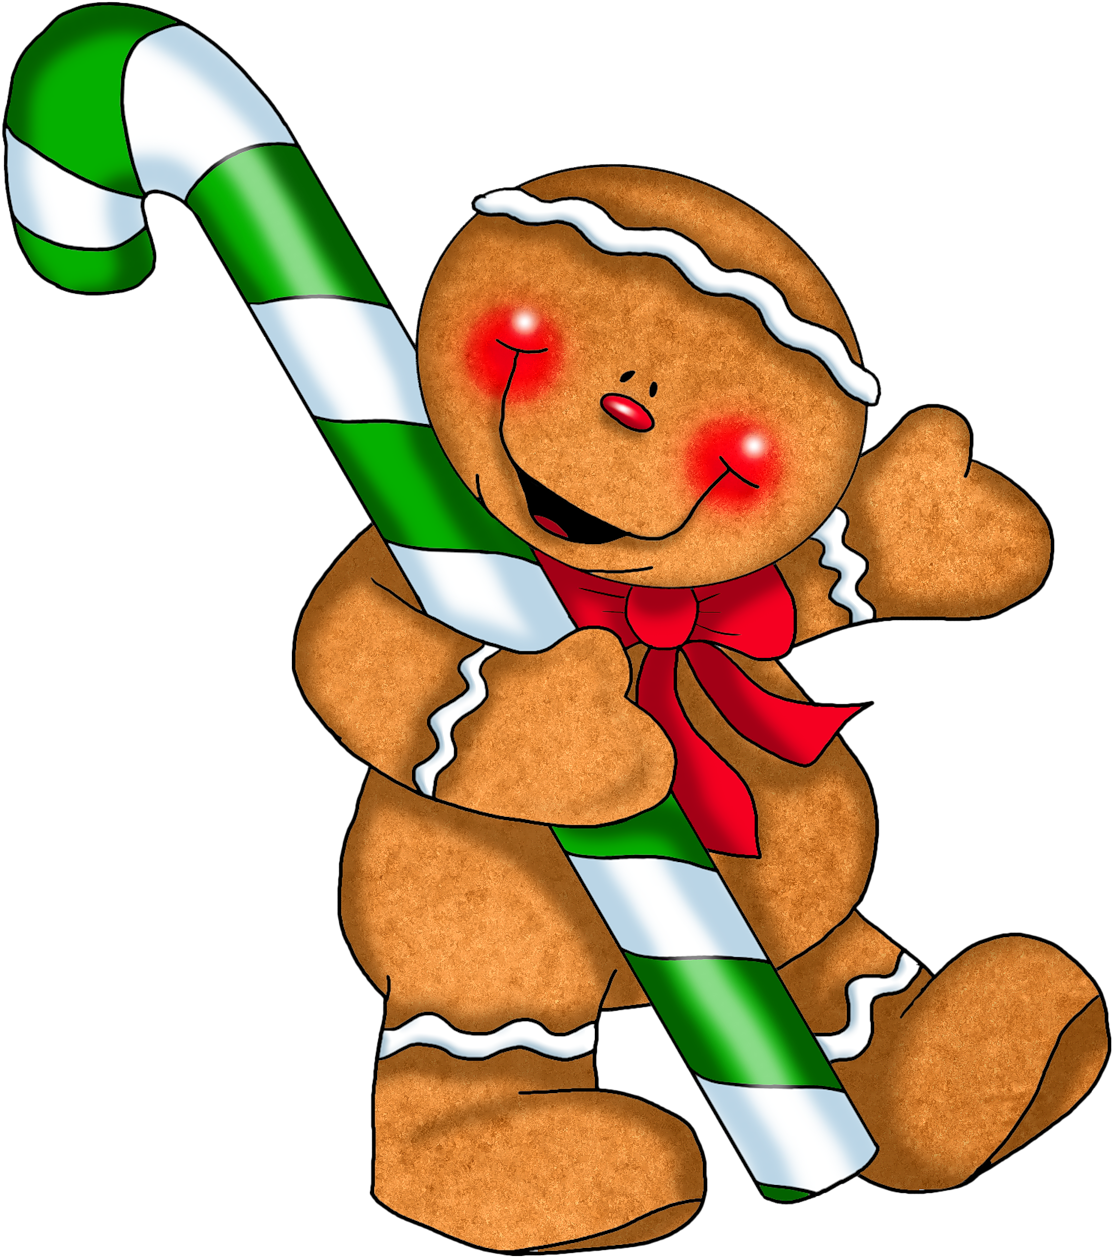 Gingerbread Man Clipart Free The Cliparts - Gingerbread Man Holding A Candy Cane (1147x1280)